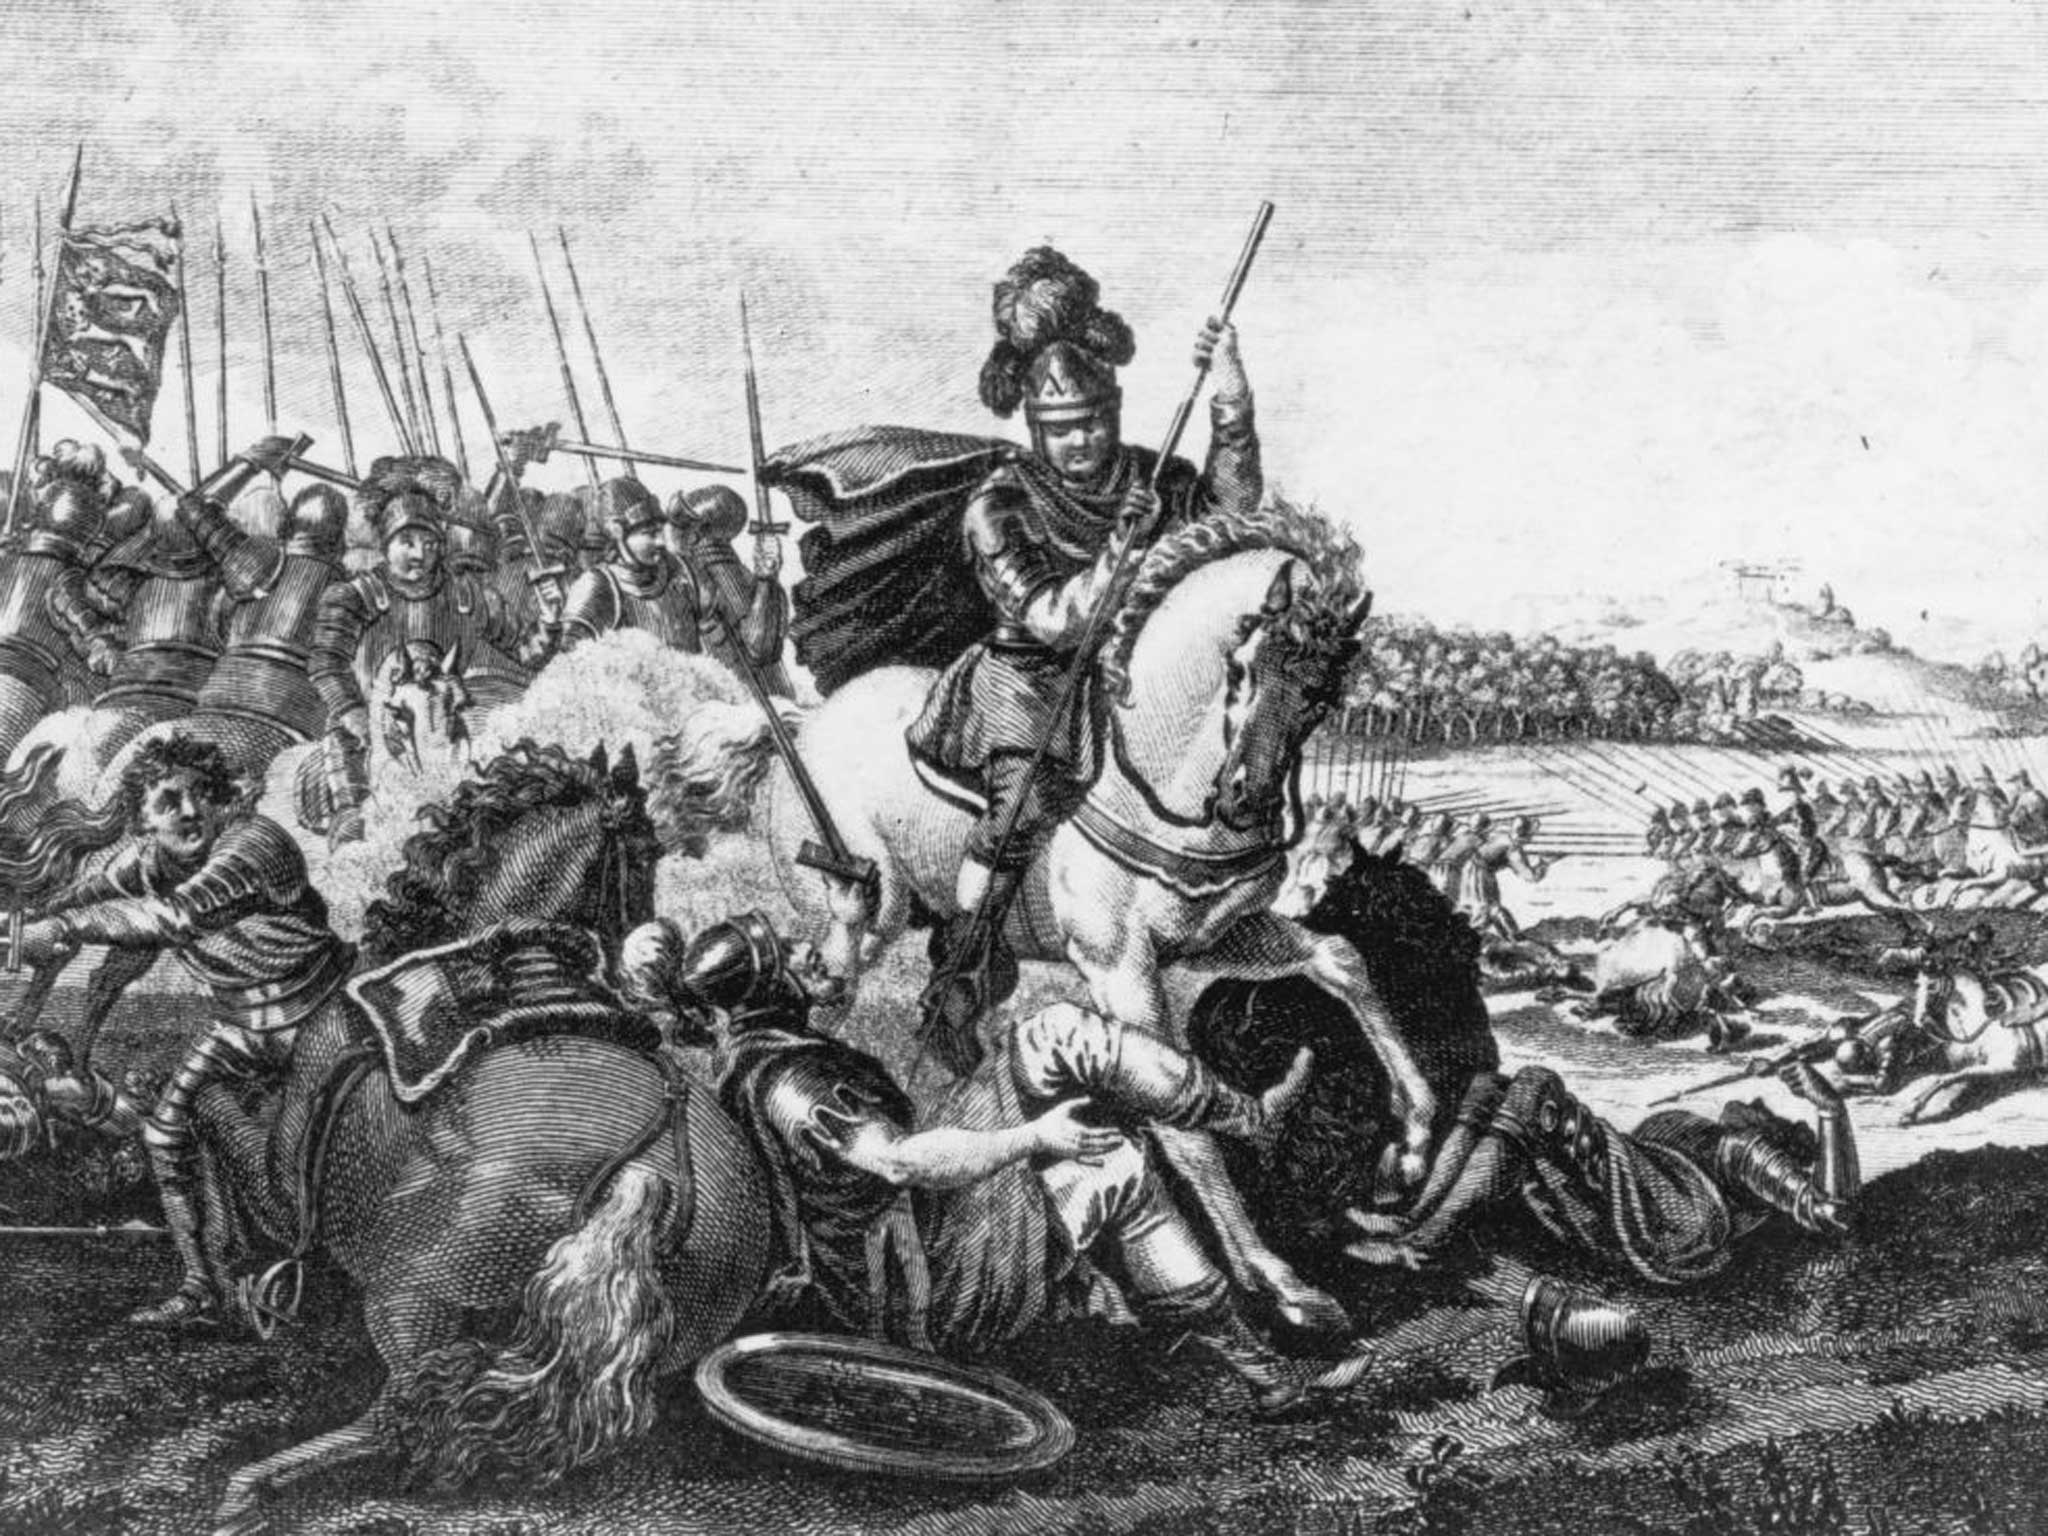 An engraving shows the English cavalry at the battle of Bannockburn